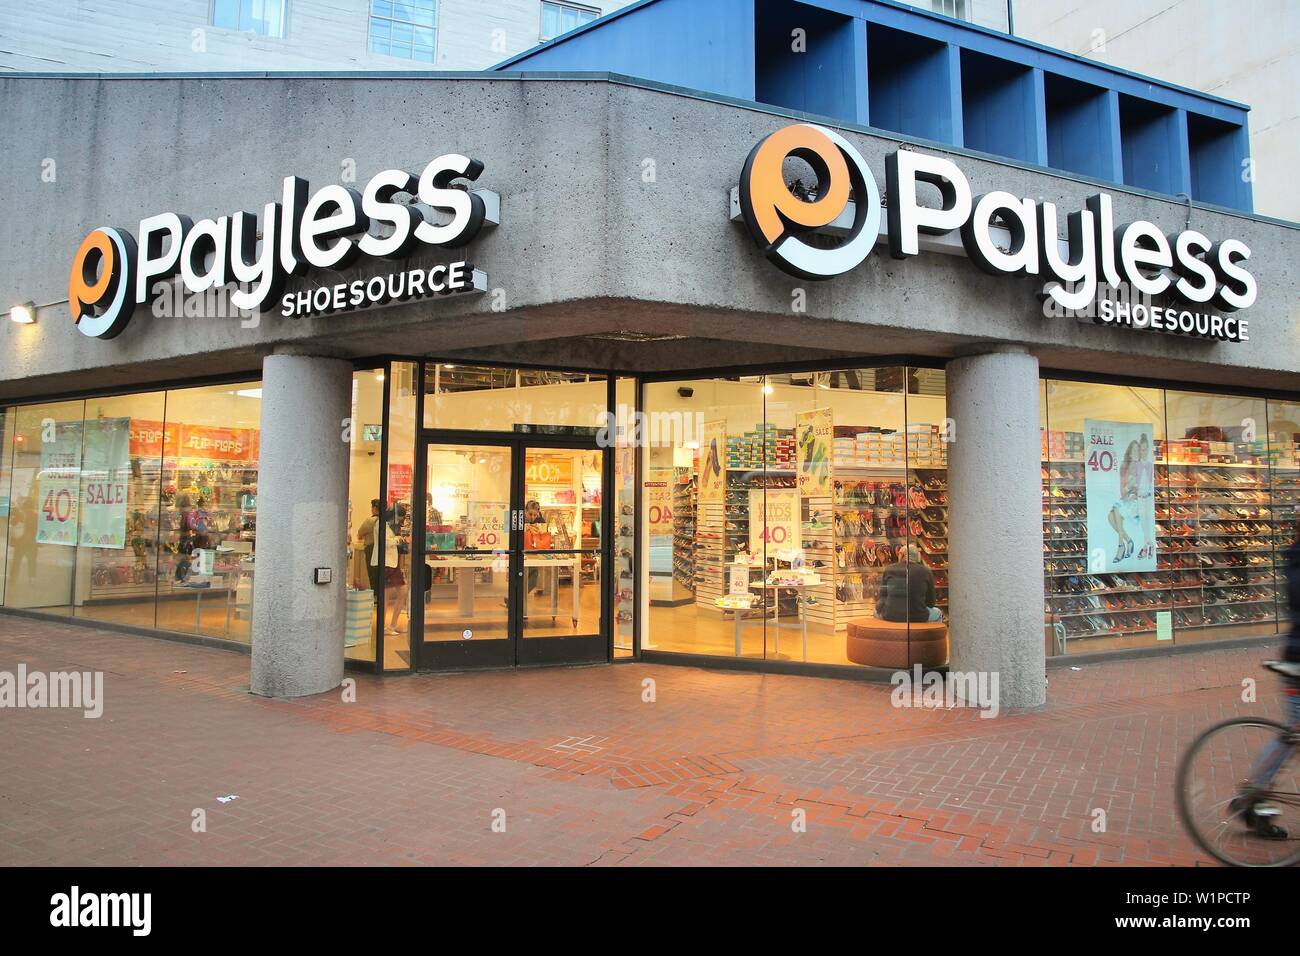 SAN FRANCISCO, USA - APRIL 8, 2014: Shoppers visit Payless Shoesource footwear store in San Francisco, USA. Payless went bankrupt in 2017. Stock Photo